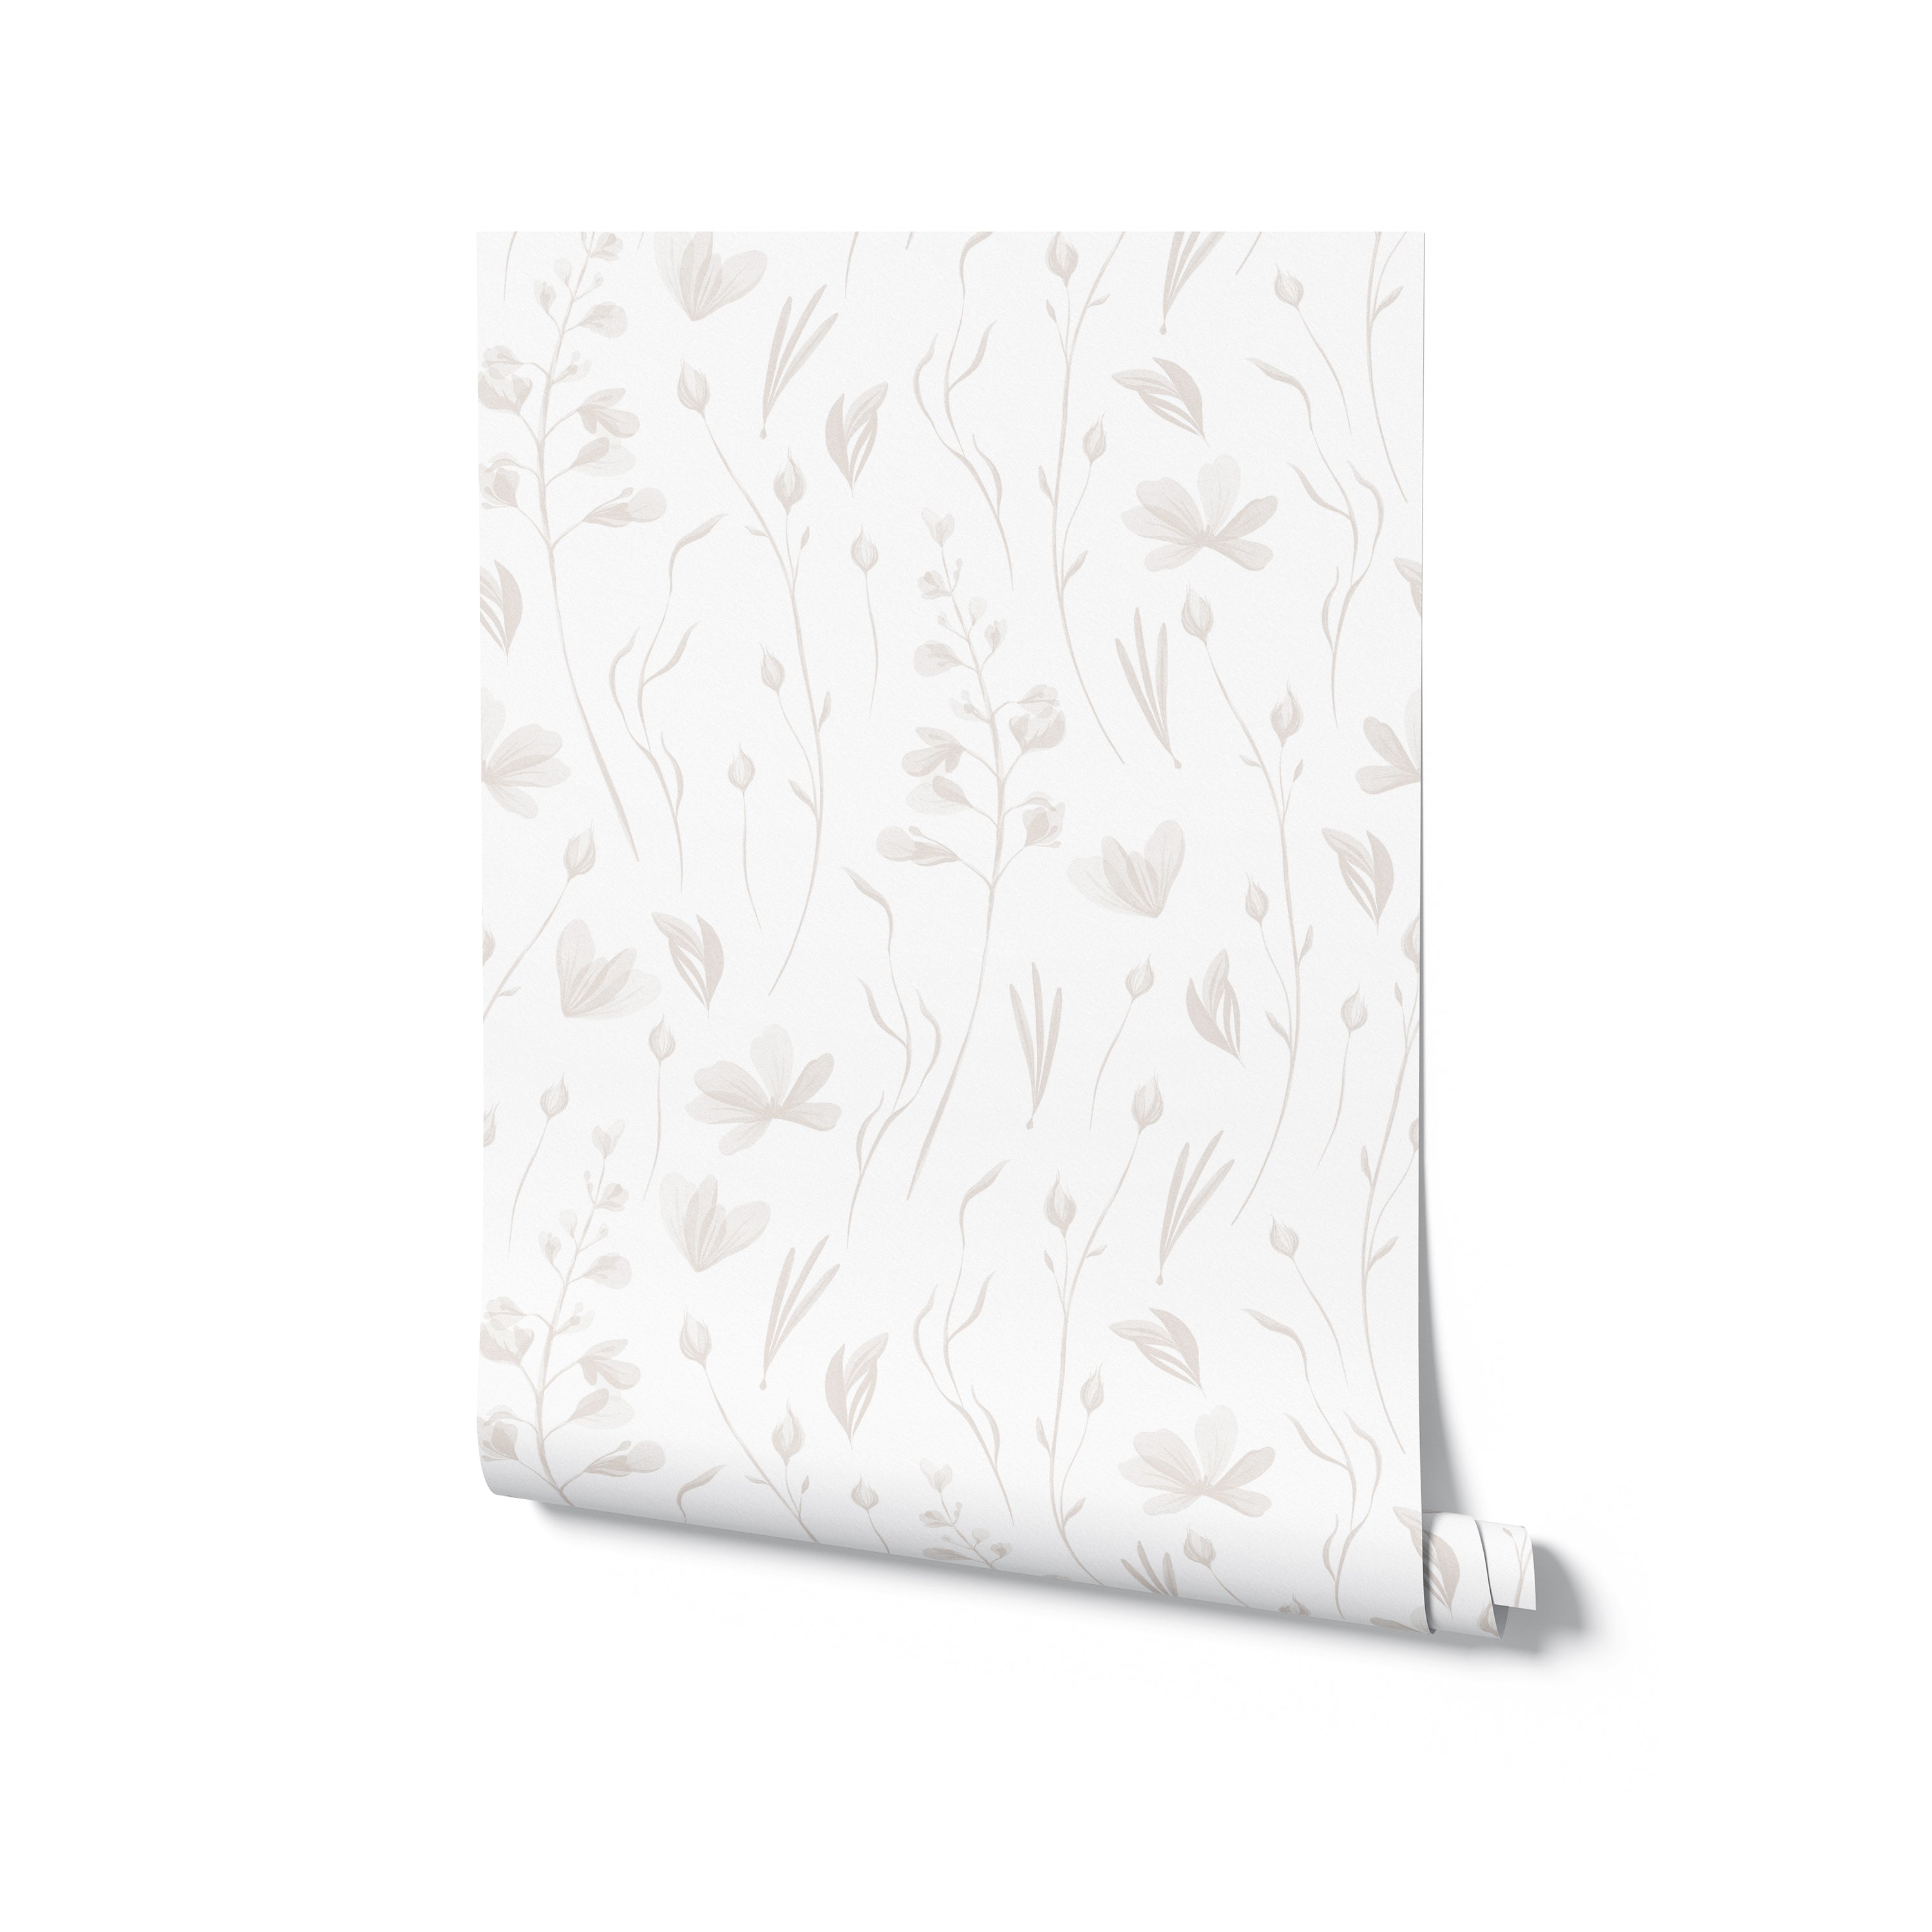 A rolled-up piece of warm grey watercolor floral wallpaper against a plain white background, illustrating the wallpaper’s design and color scheme that can bring a touch of nature's serenity into a room.